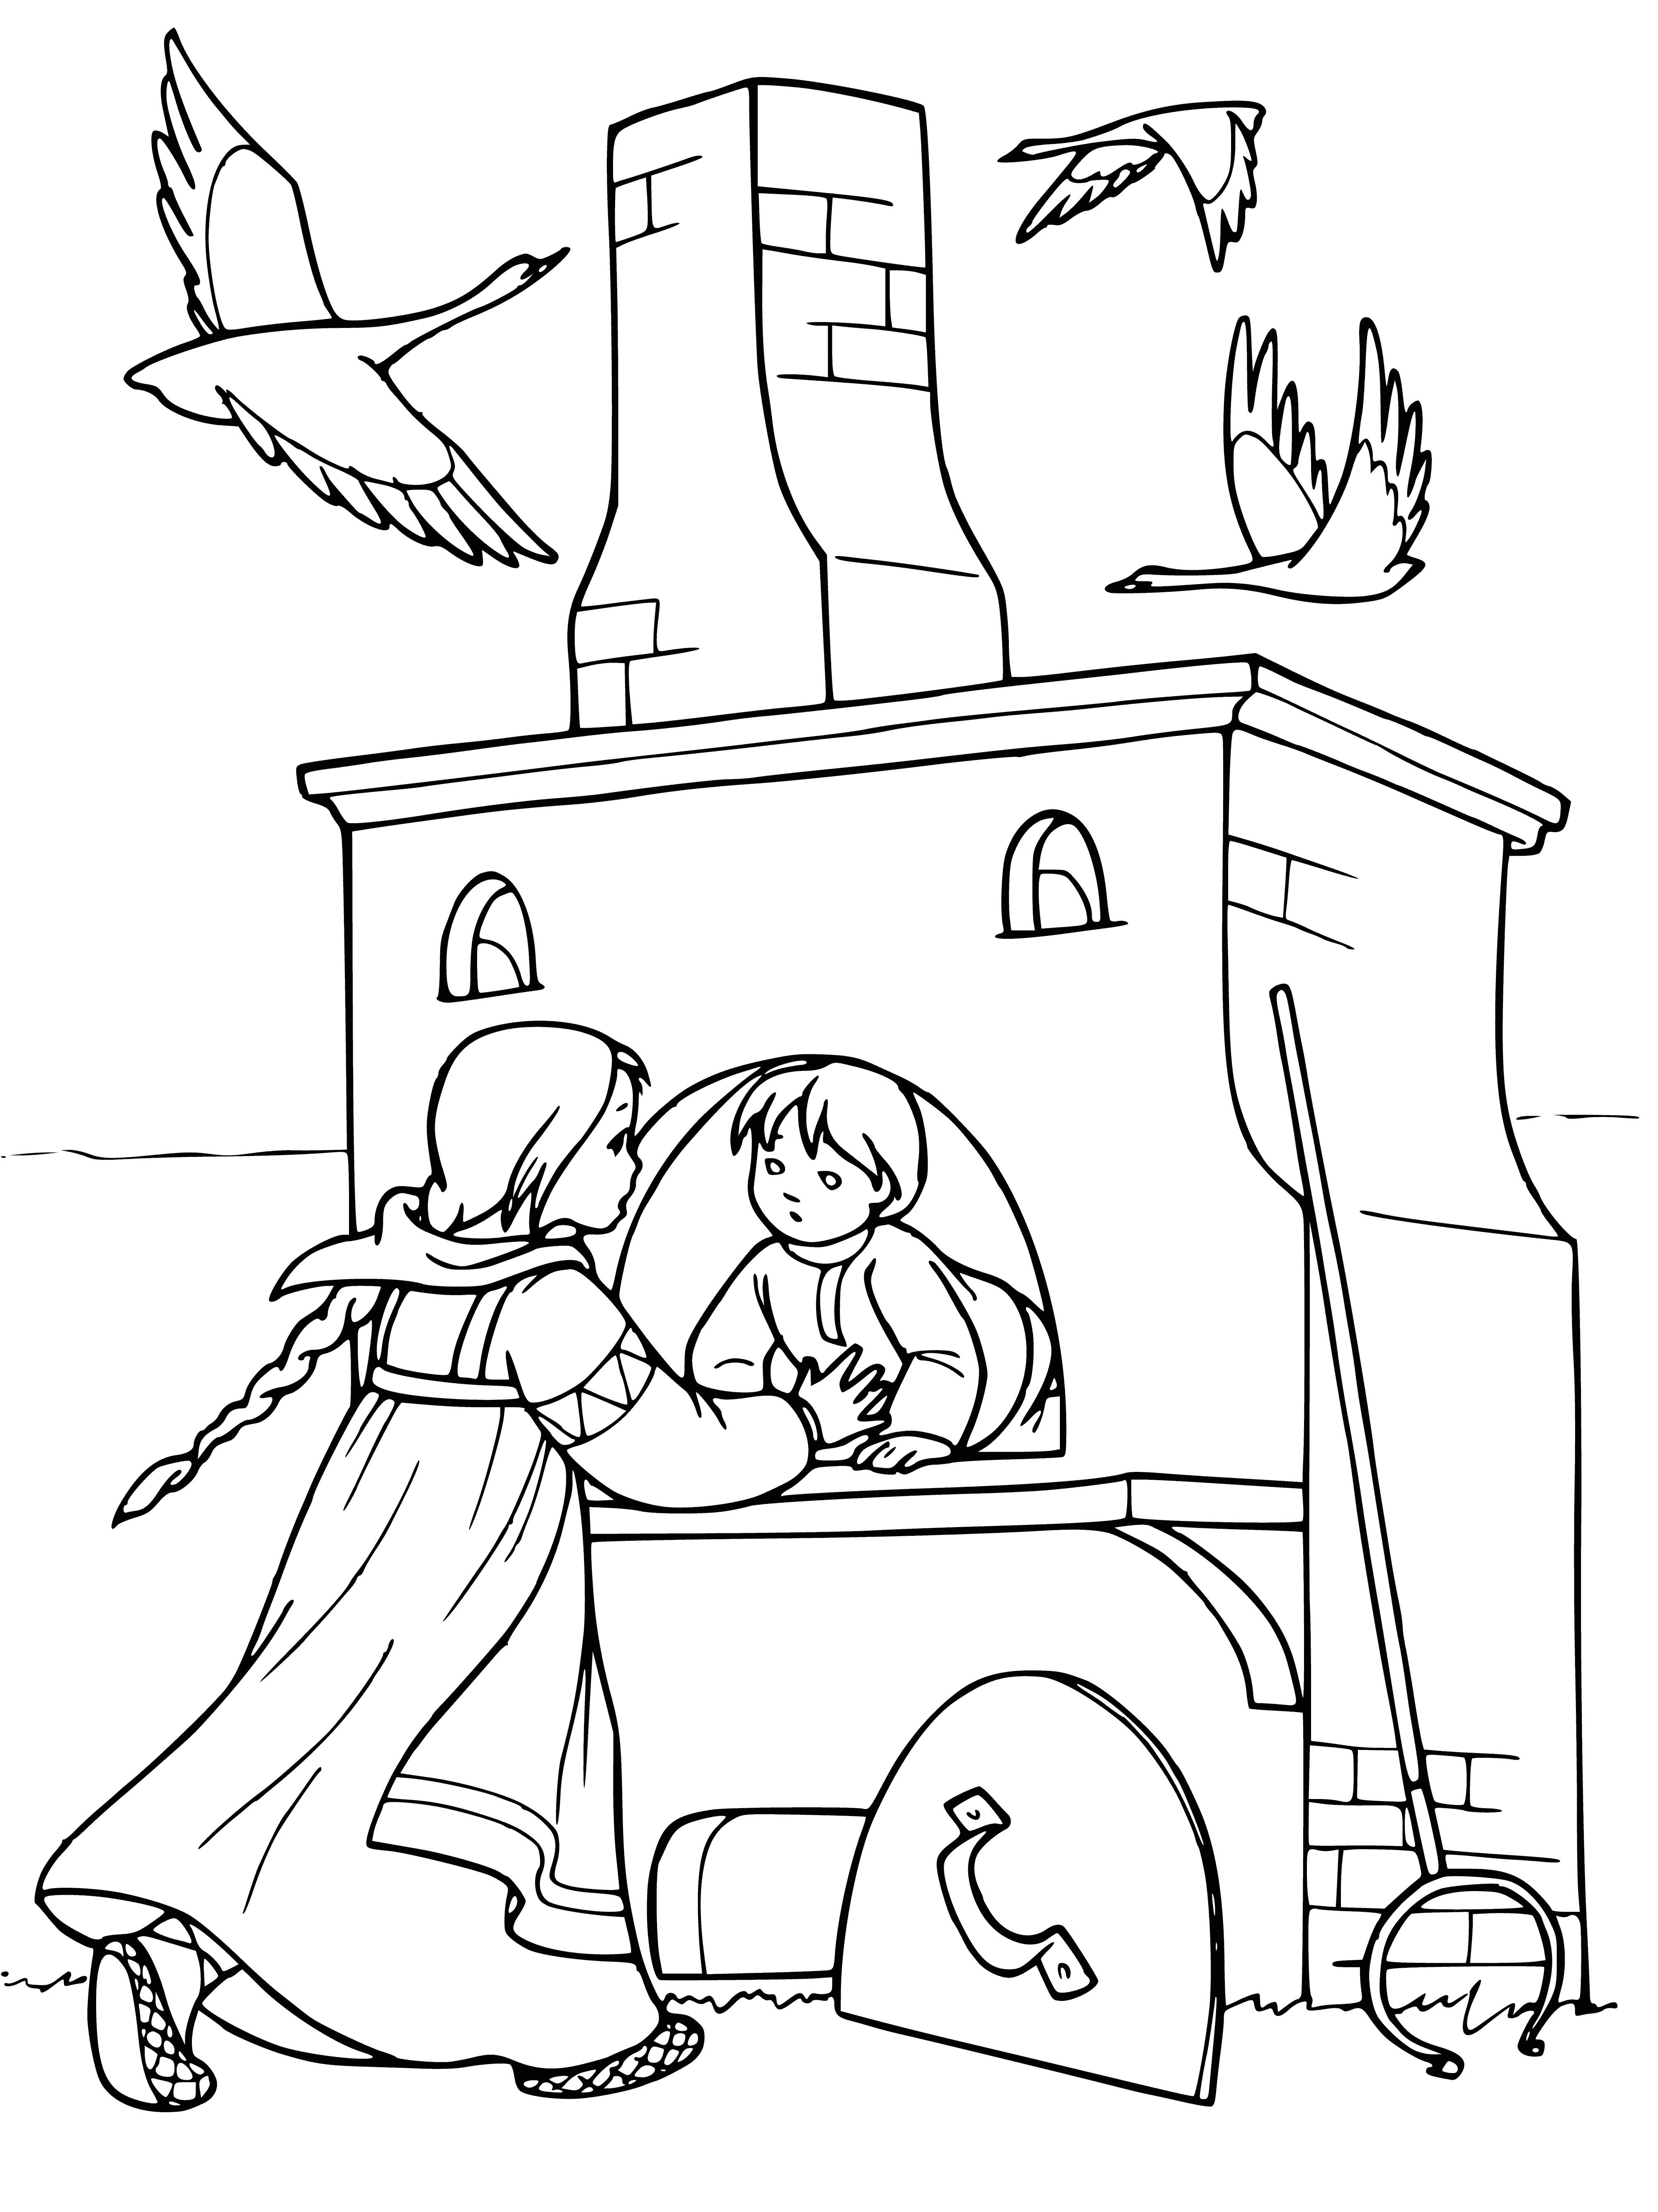 coloring page: Two children hide behind a slightly open stove, a girl in a blue dress & a boy in a brown shirt - the girl has a hand on the boy's shoulder.